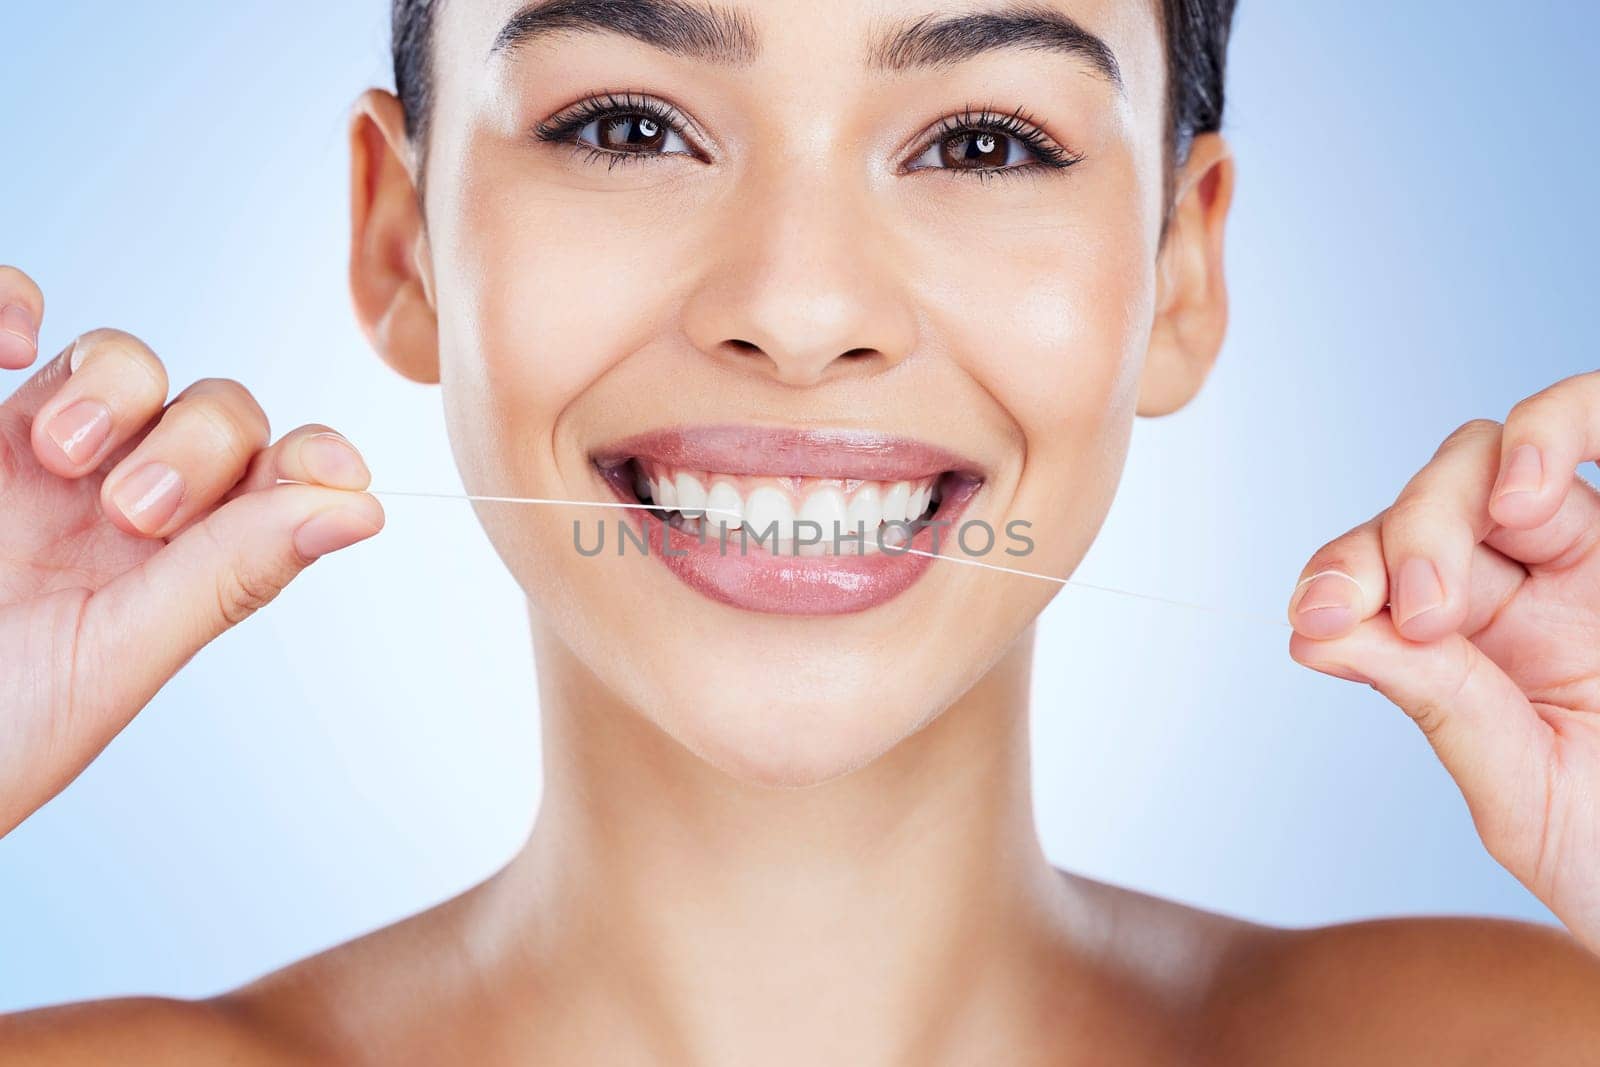 Face, flossing teeth and dental with woman, hygiene and beauty with grooming and mouth care on blue background. Hands, string and healthy gums with fresh breath, health and skin glow in portrait.